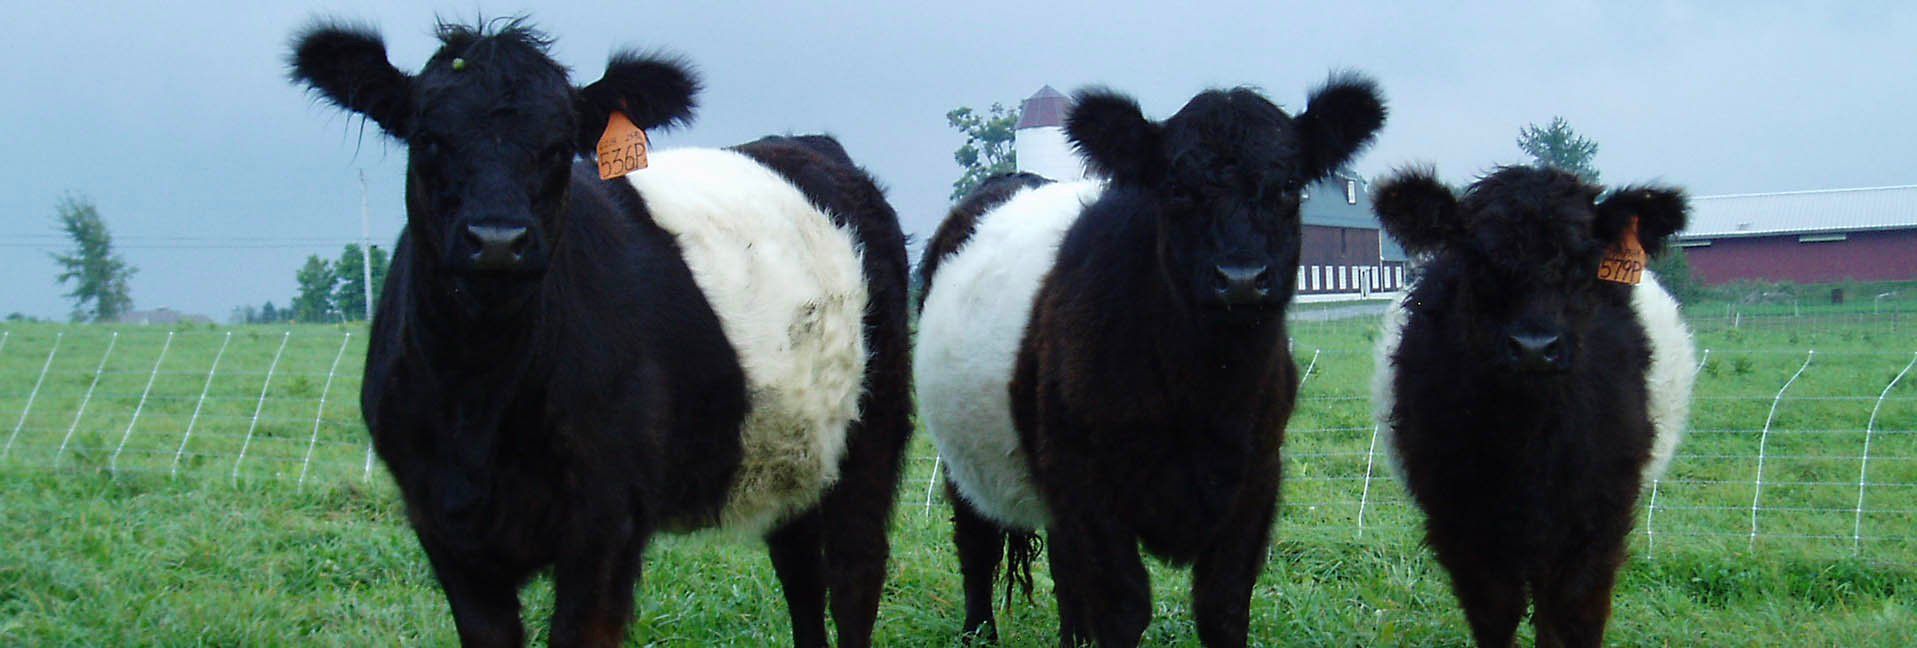 What’s Black-And-White And Loved All Over? Belted Galloways, the Oreo cookie cow